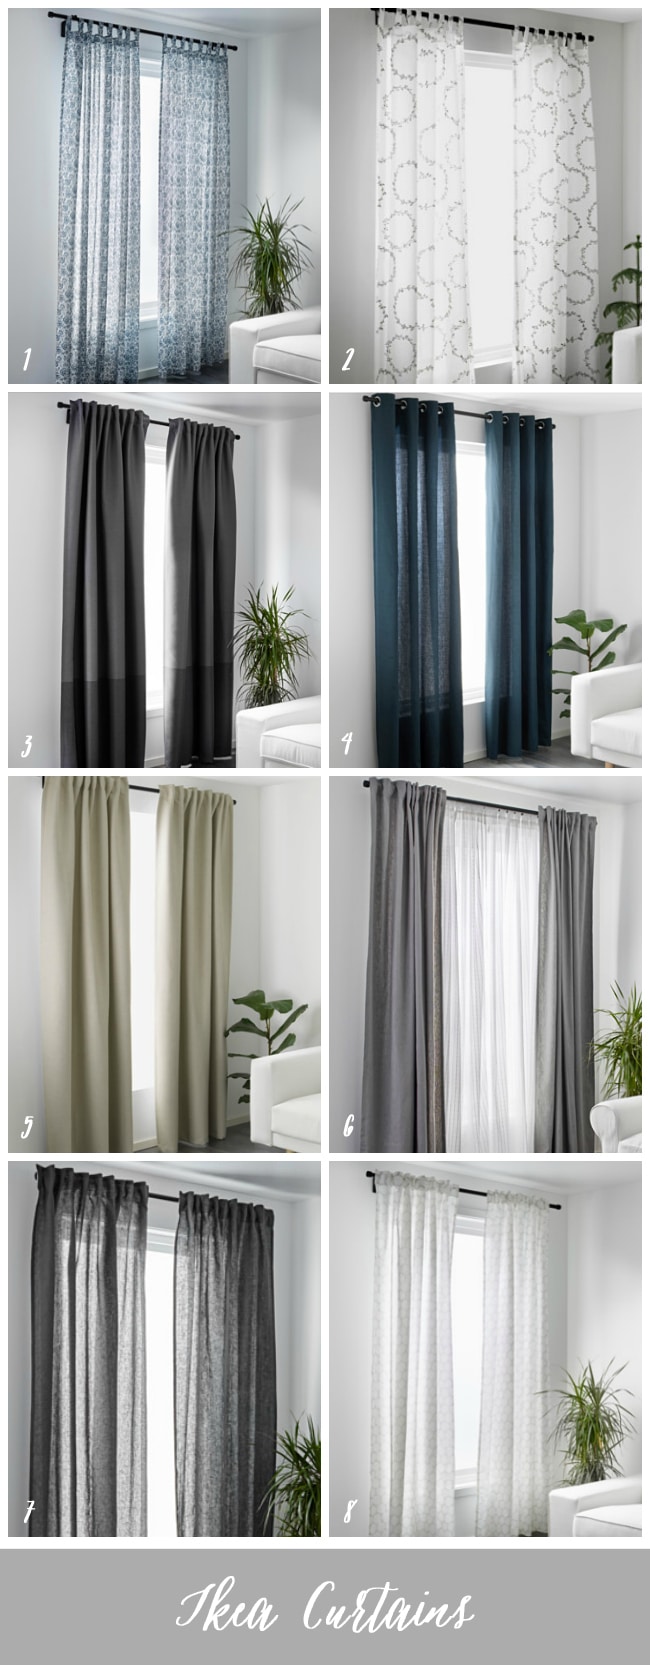 The Question of Curtain Panels